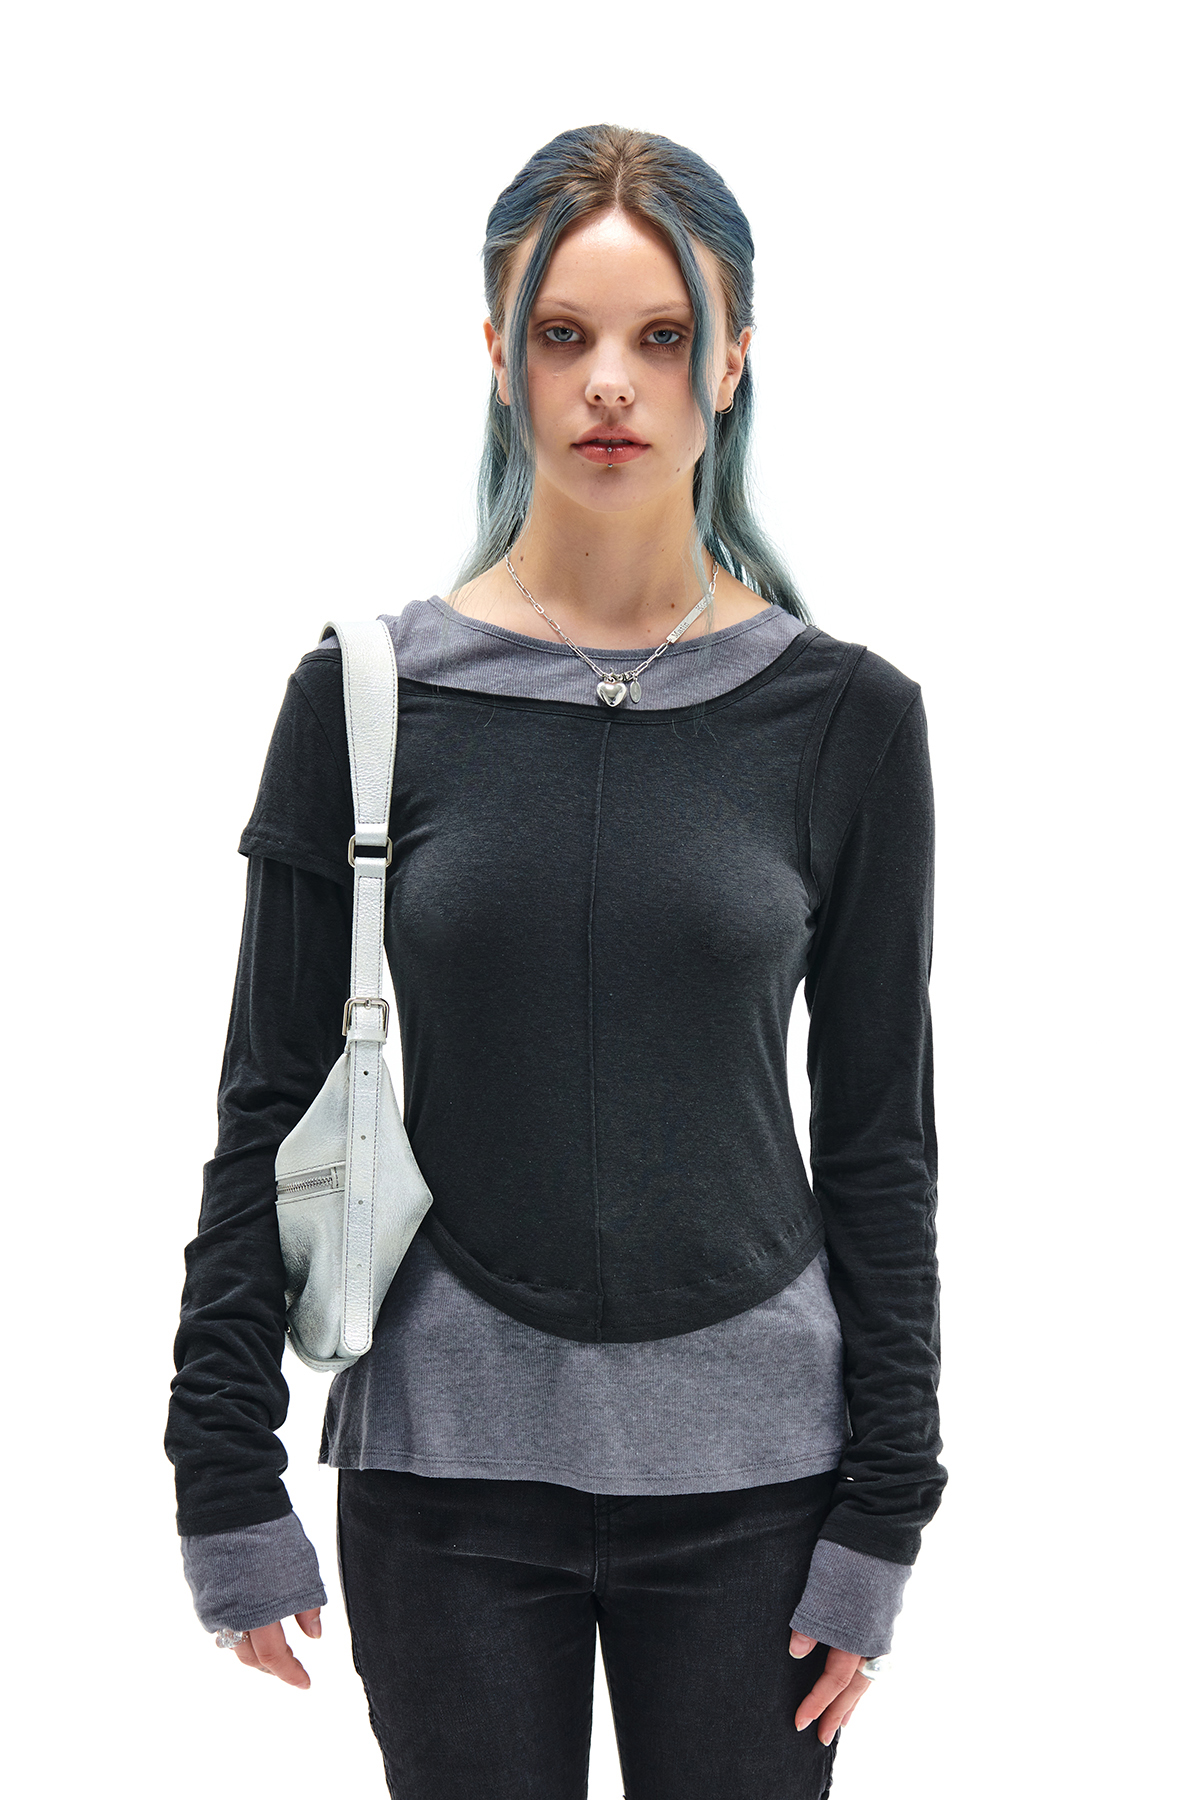 TWO TONE LAYERED TOP IN CHARCOAL